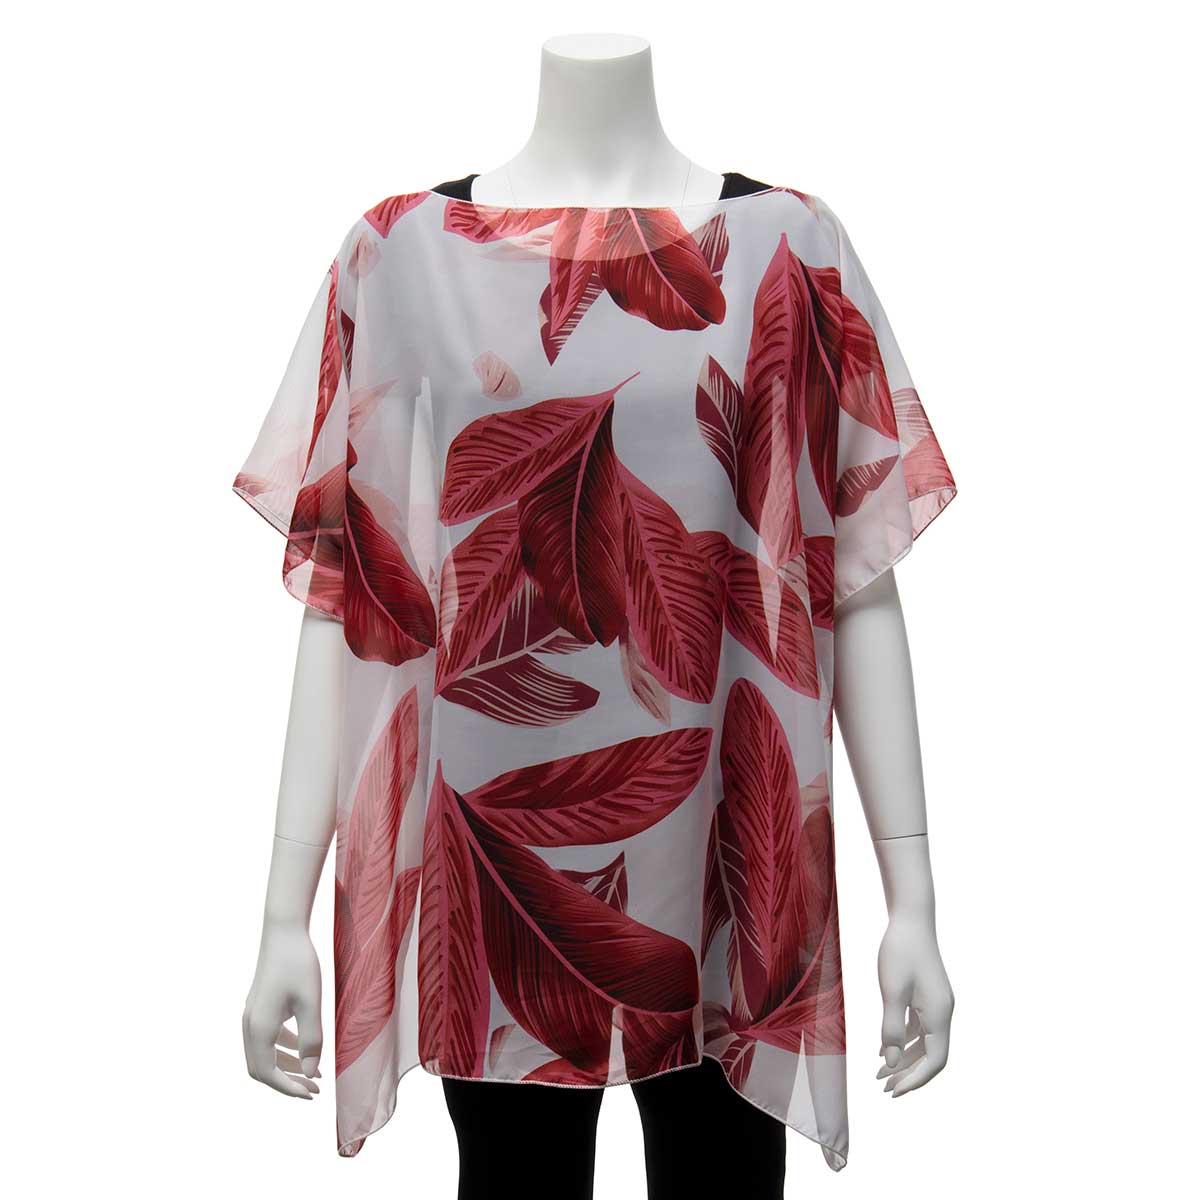 b50 TUNIC PALM LEAF RED/WHITE 35IN X 29IN ONE SIZE FITS MOST